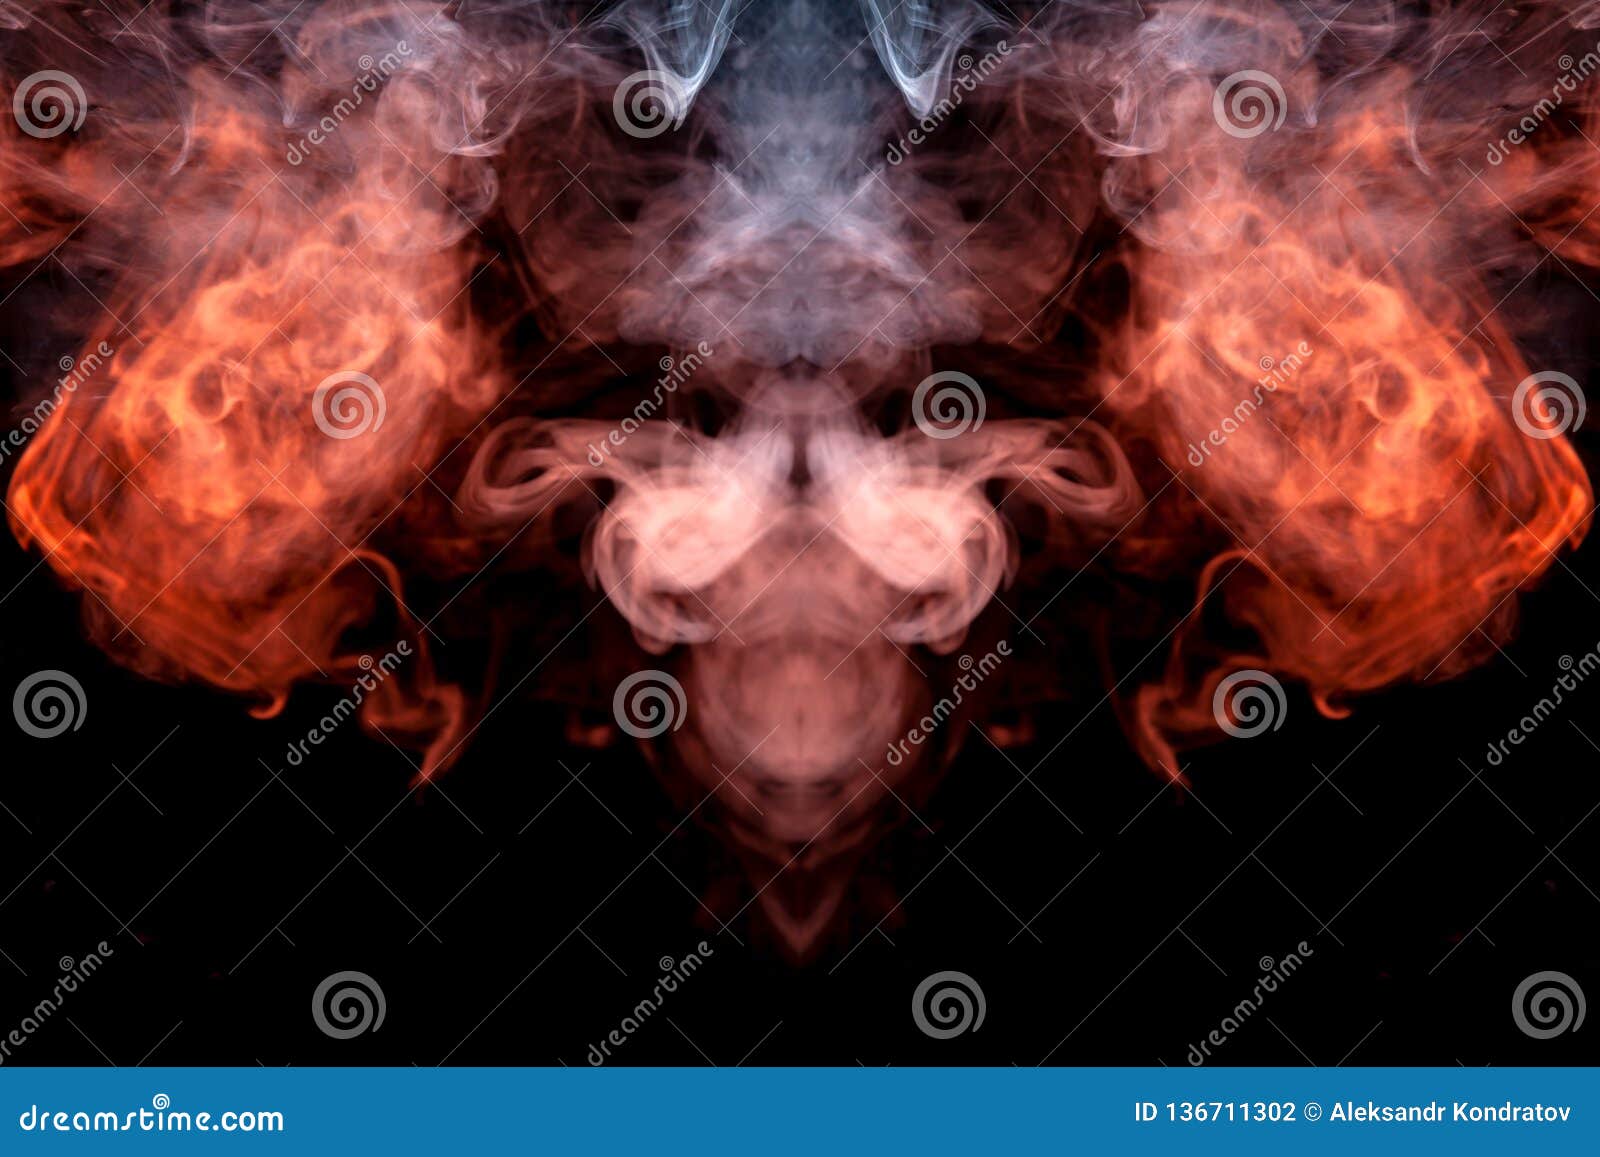 the head of a ghost on a black background from a smoke pattern of an orange-colored vape vaporizing